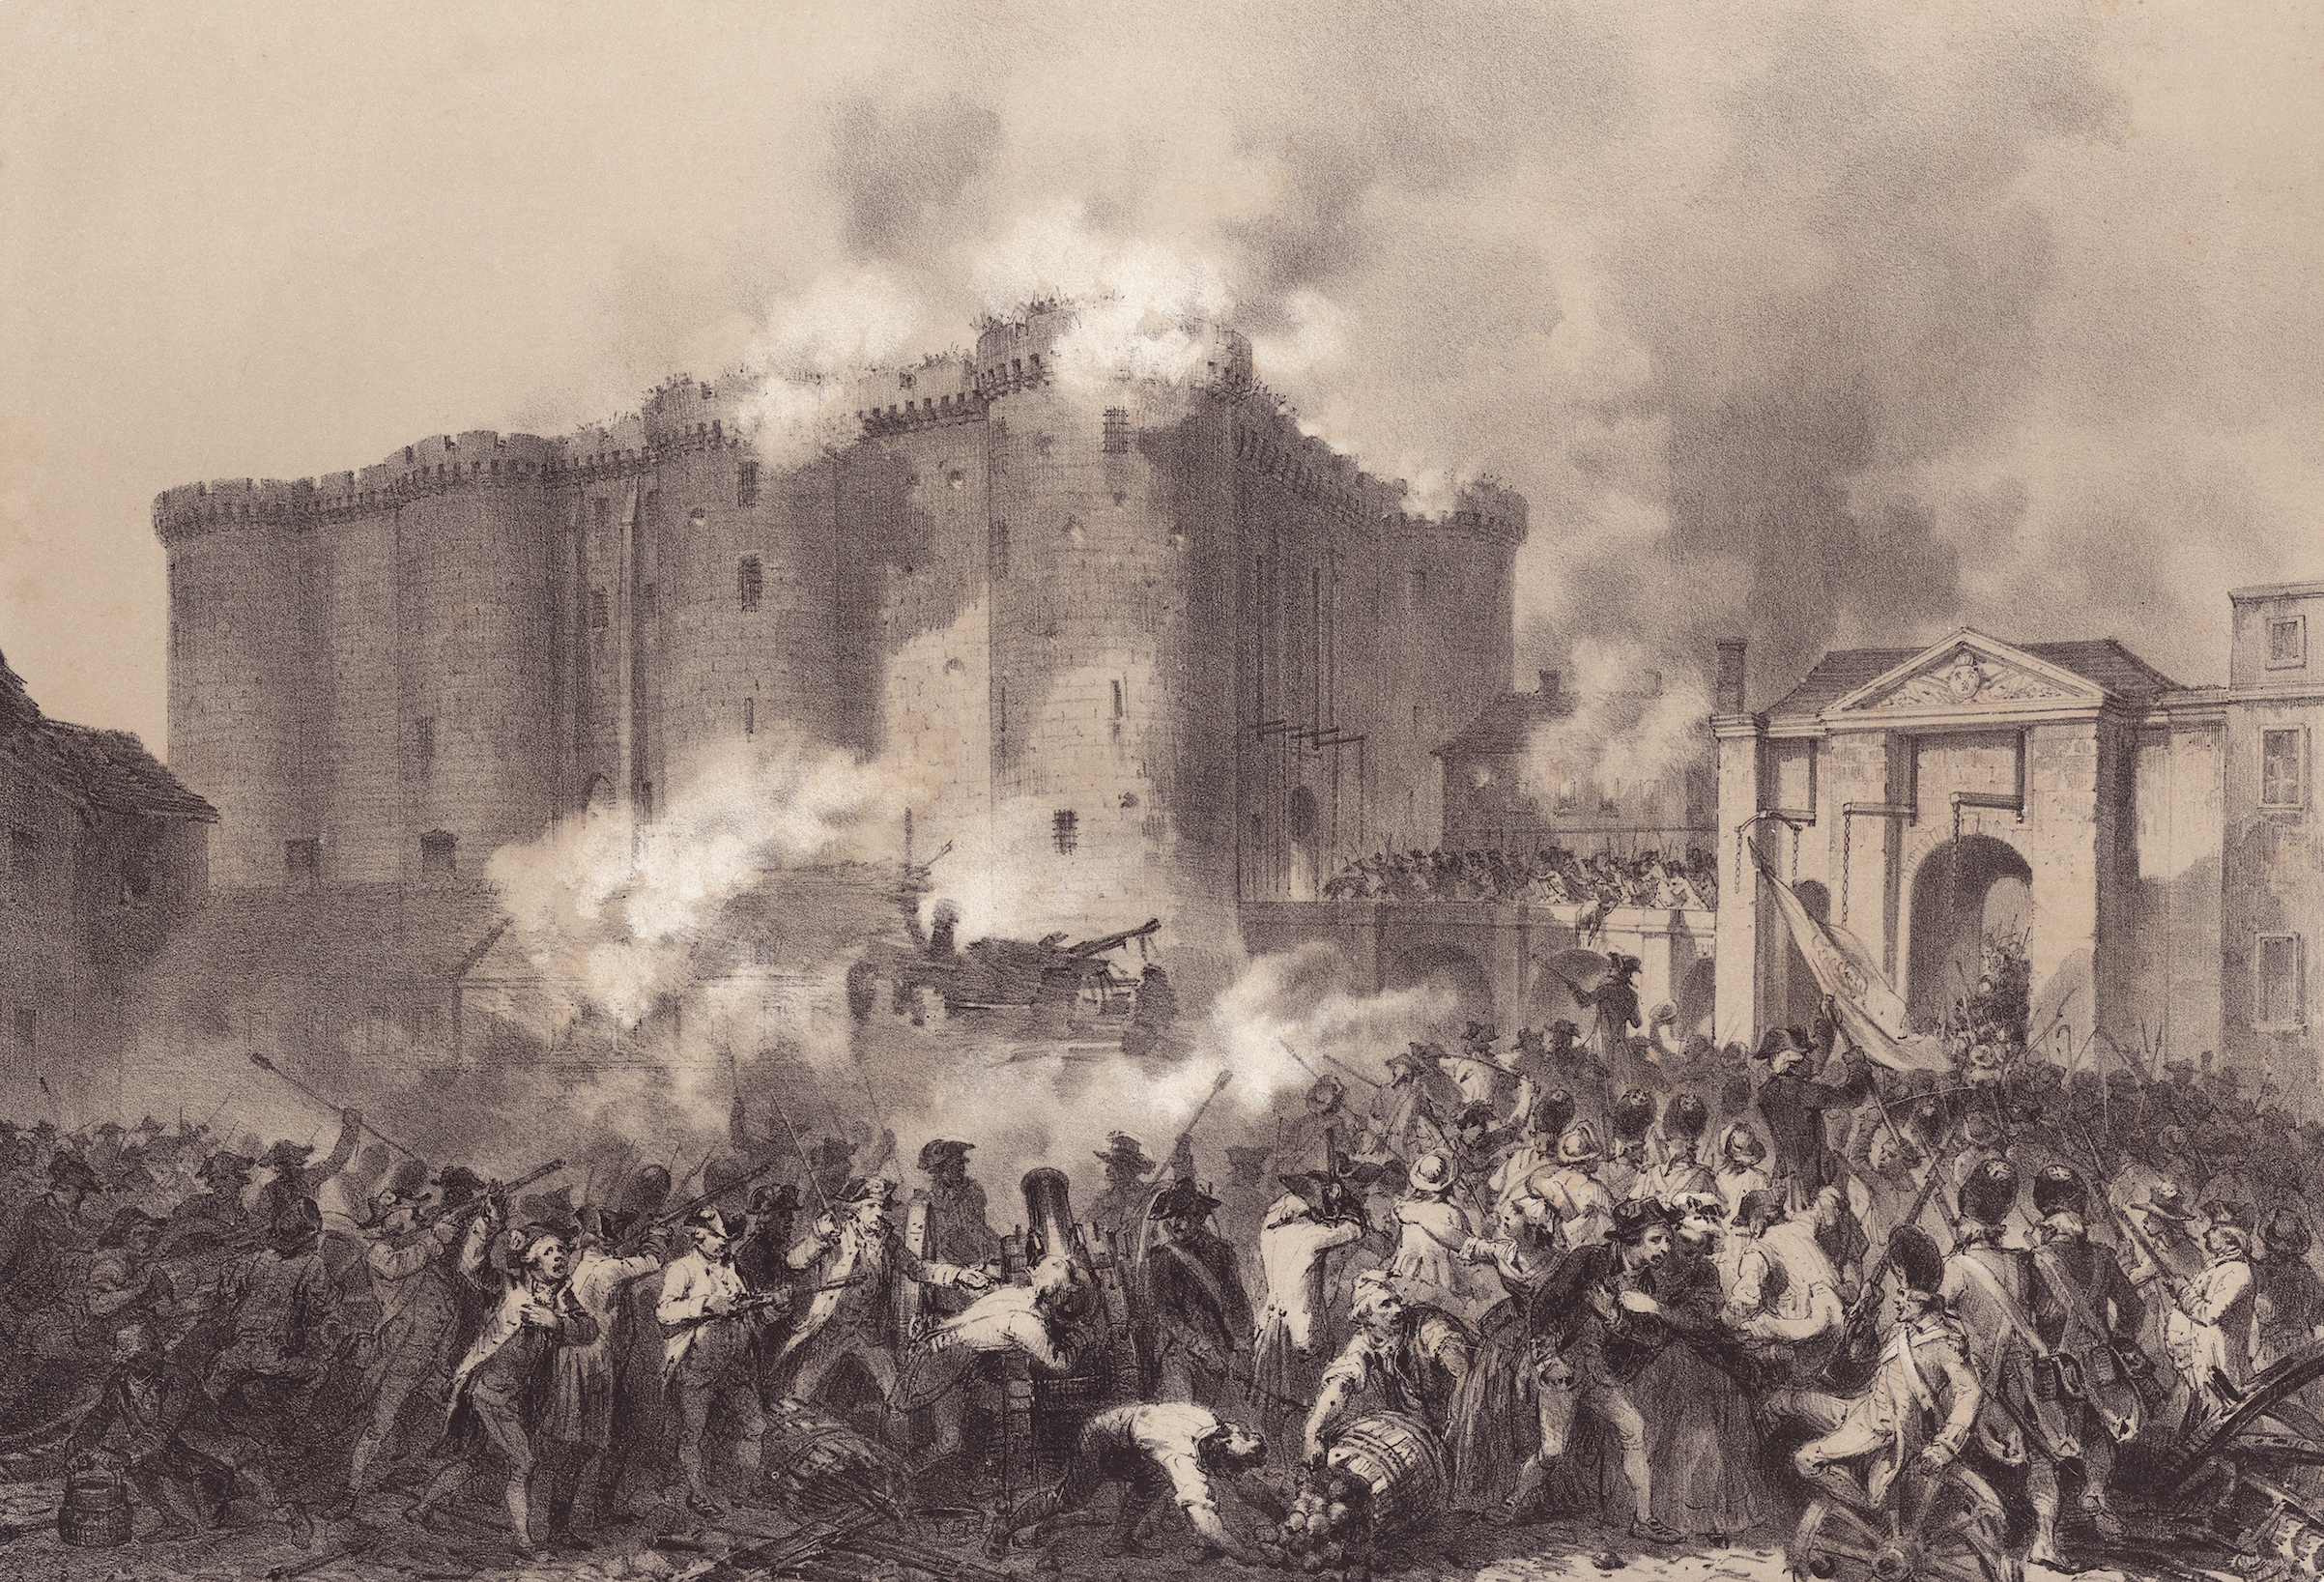 Lithograph of the the storming of the Bastille in on July 14, 1789. (adoc-photos/Corbis via Getty Images)